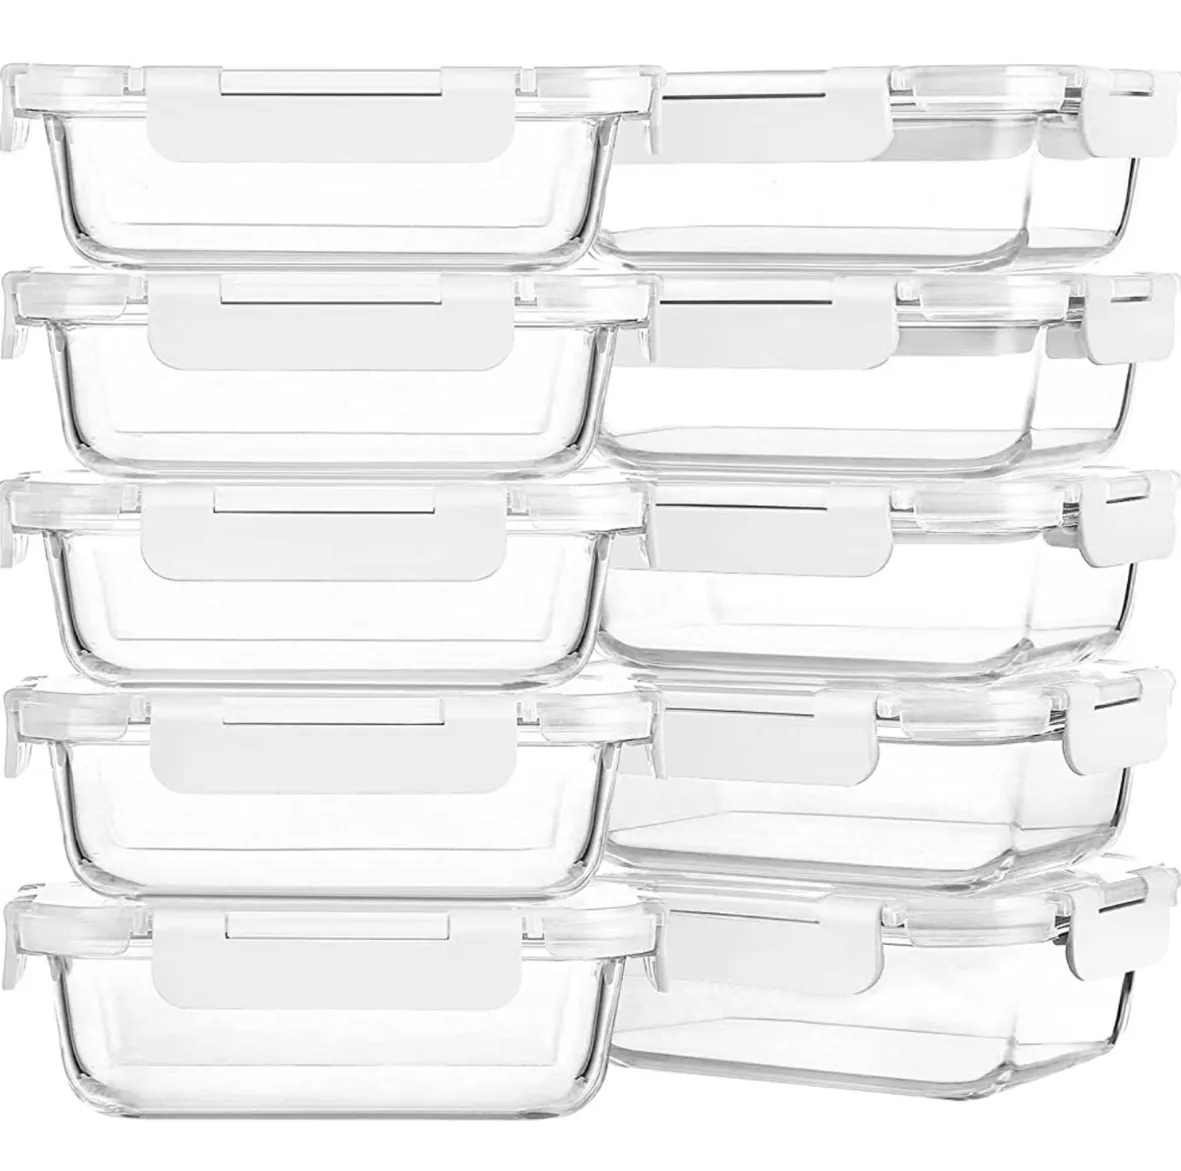 [8-Pack,30 oz]Glass Meal Prep Containers,MCIRCO Glass Food Storage  Containers,Airtight lunch Containers with Lids - BPA-Free Microwave, Oven,  Freezer